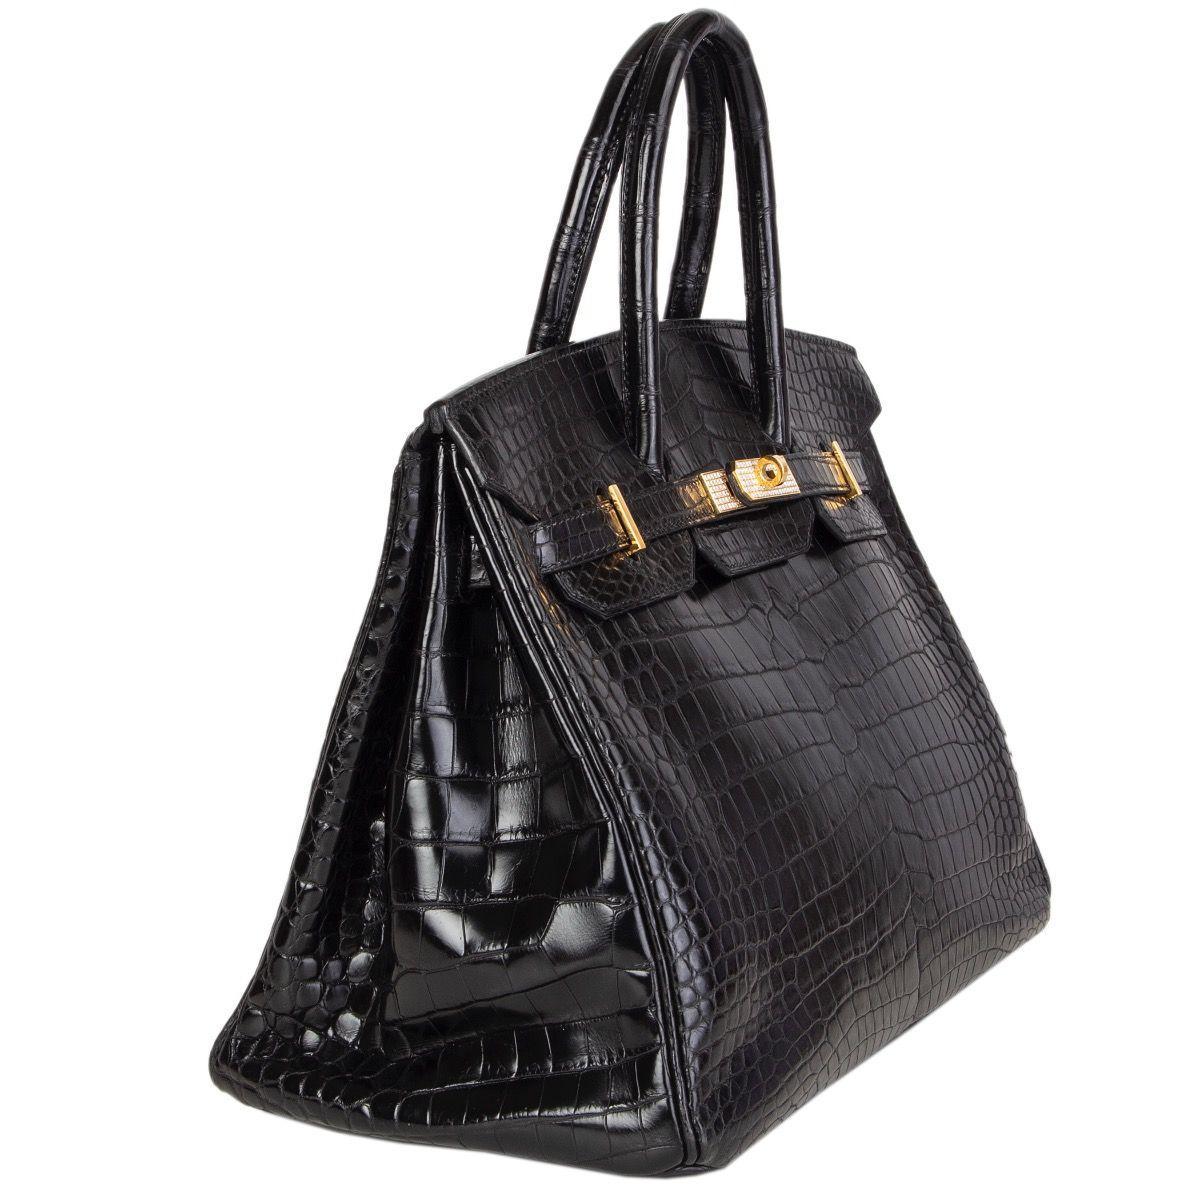 Hermes 'Birkin 35' in black matte porosus crocodile (smallest scales an therefore the most valuable and expensive crocodile available at Hermes). The hardware has is in 18ct gold with pave diamonds. Lined in Chevre (goat skin) with an open pocket